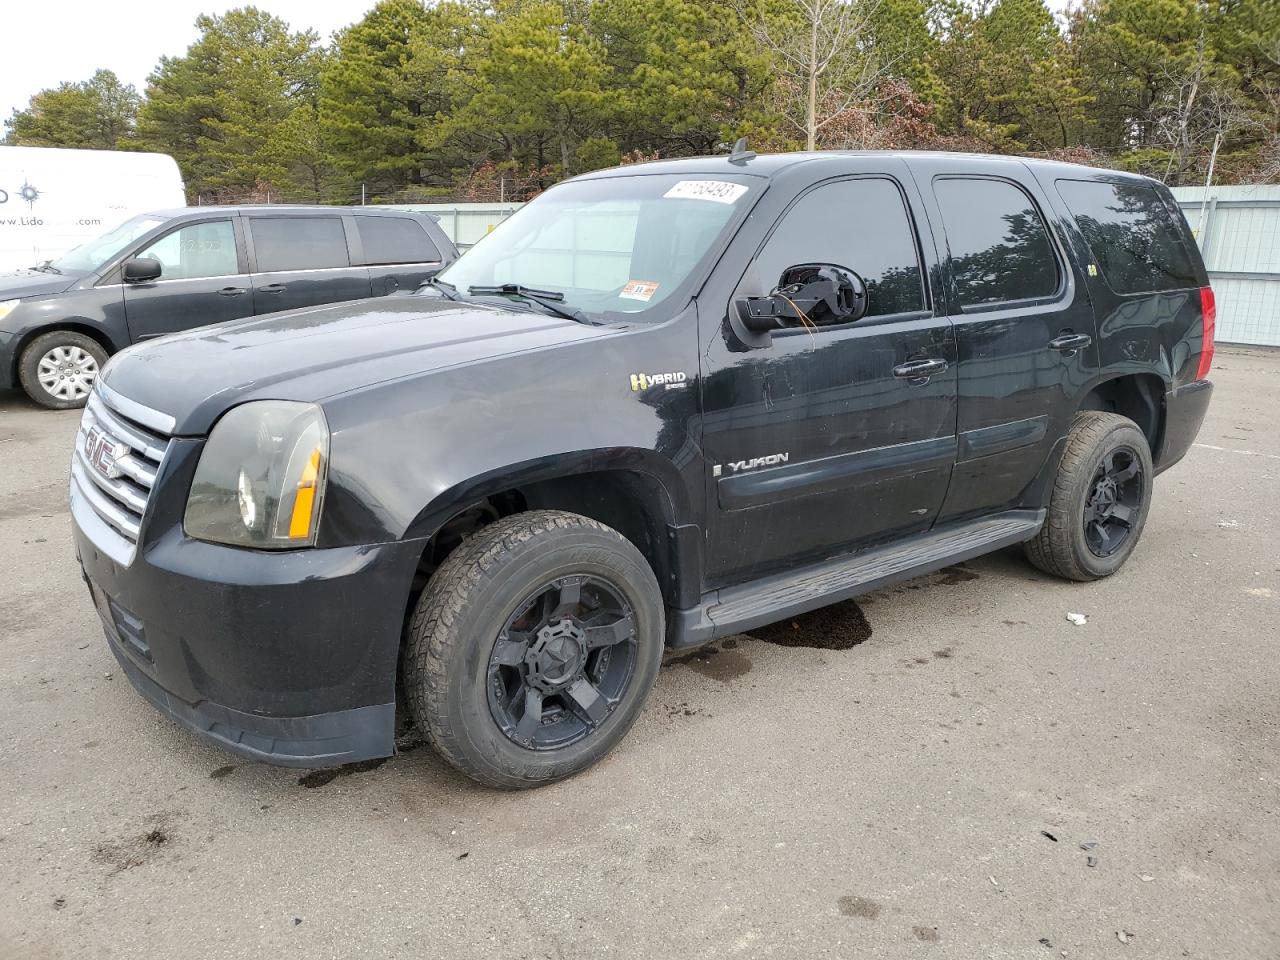 2008 GMC Yukon Hybrid for sale at Copart Brookhaven, NY Lot #41153*** |  SalvageReseller.com